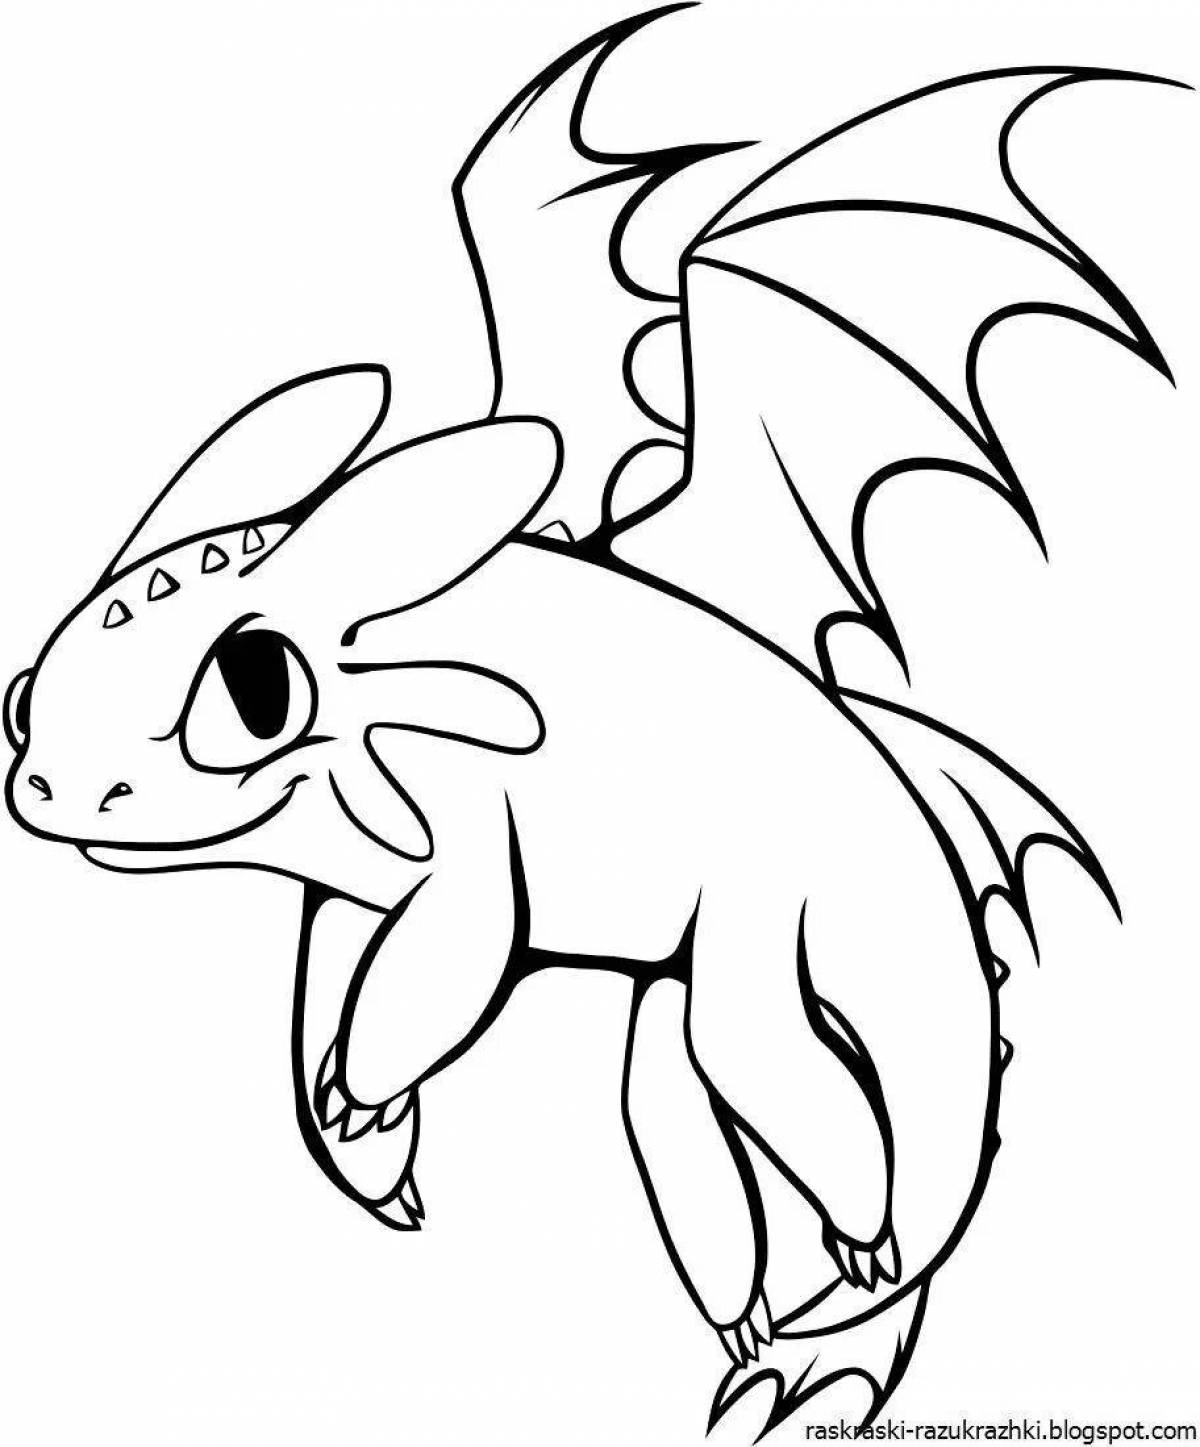 Elegant toothless coloring book for kids